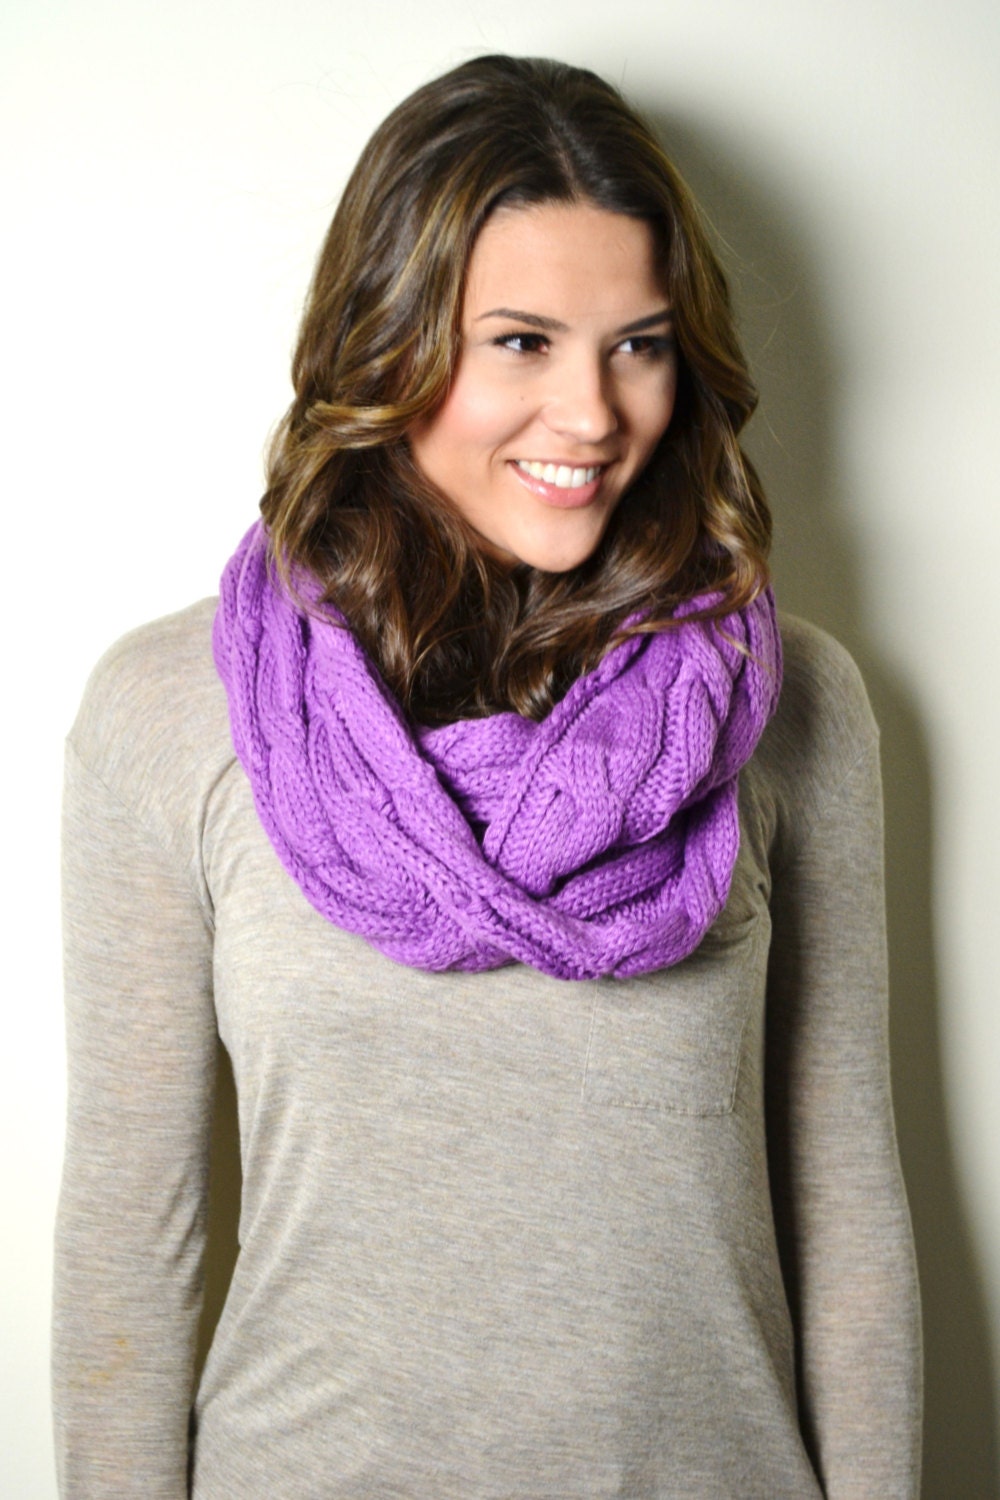 RADIANT ORCHID Chunky Knitted Infinity Loop Circle Scarf Cable Pattern Gift Idea Thick Knitted Scarf - AnytimeScarf